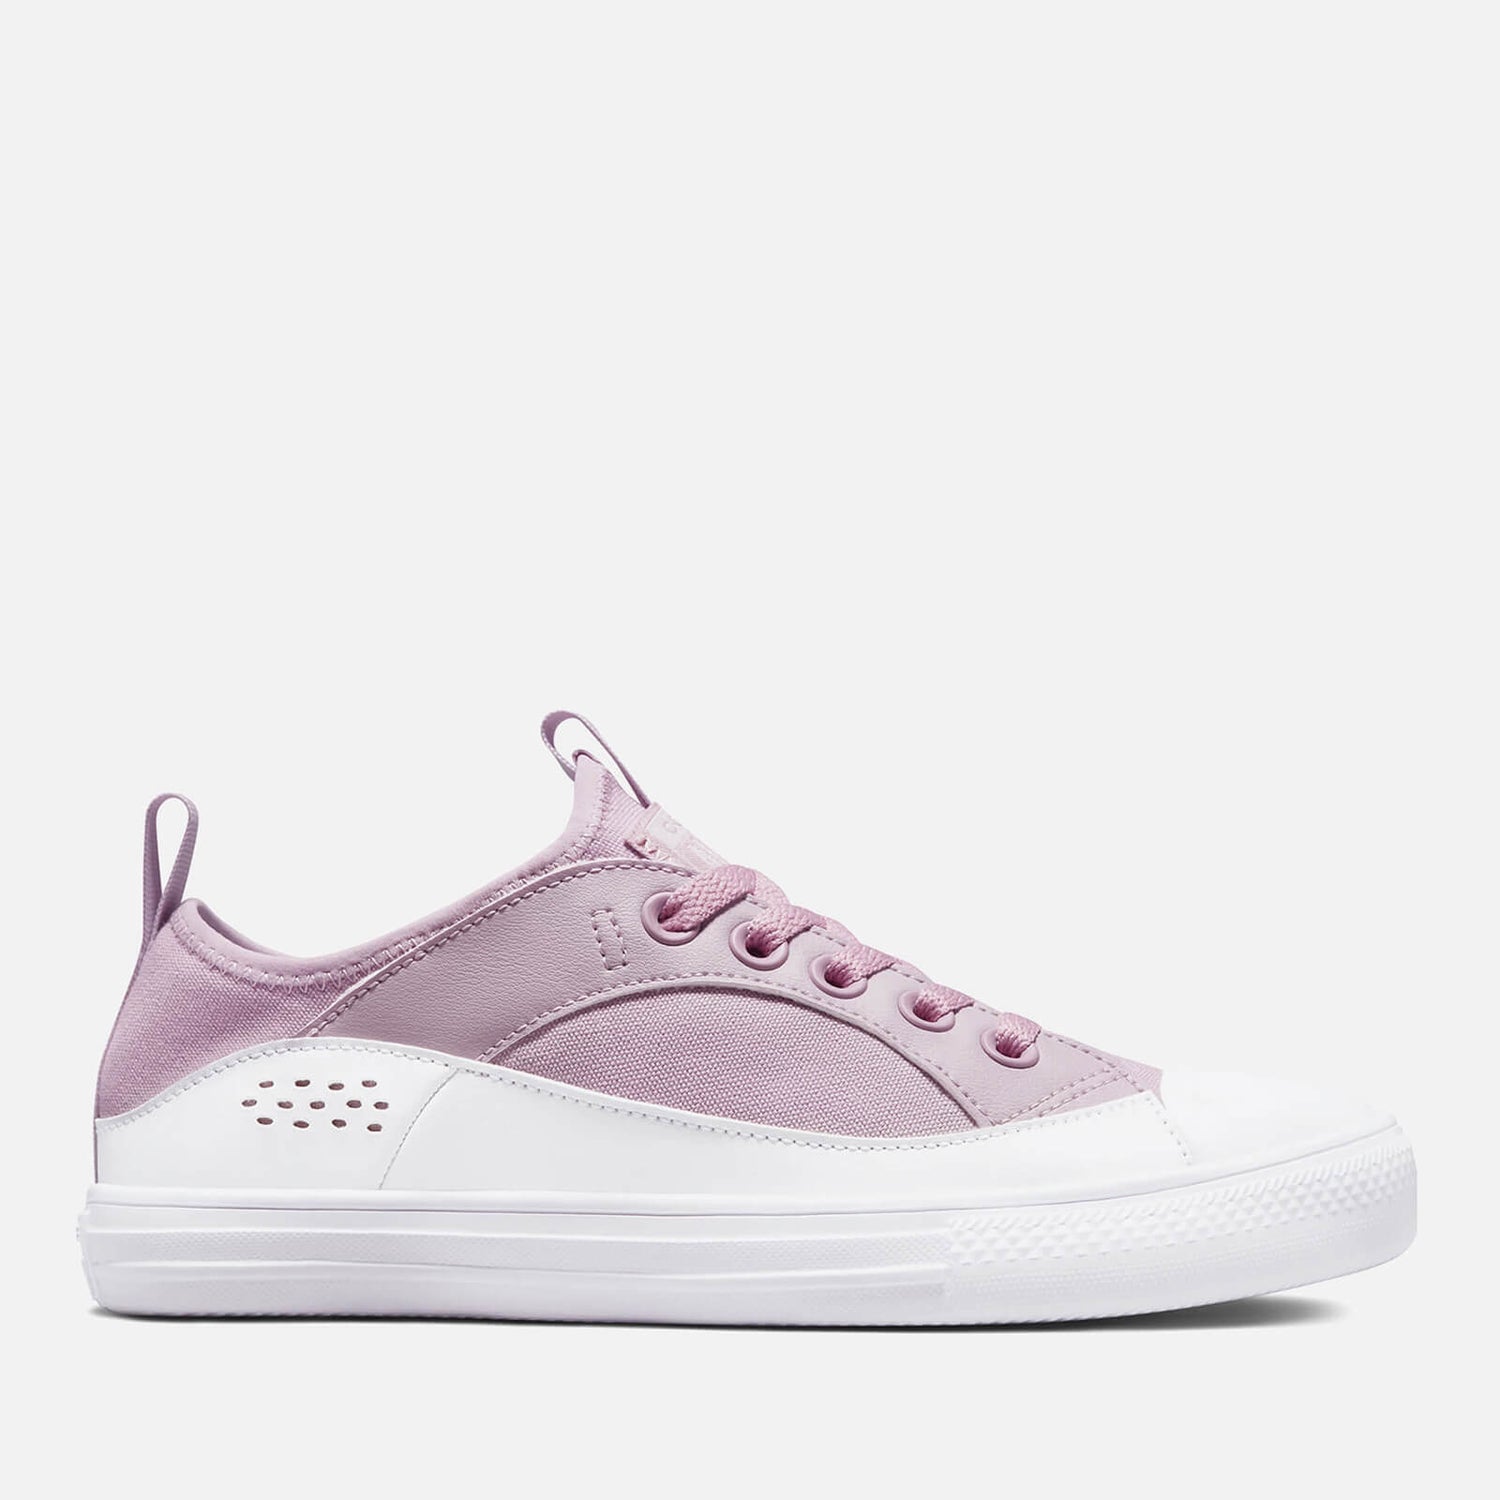 Converse Women's Chuck Taylor All Star Wave Ultra Ox Trainers - Peaceful Plum/White